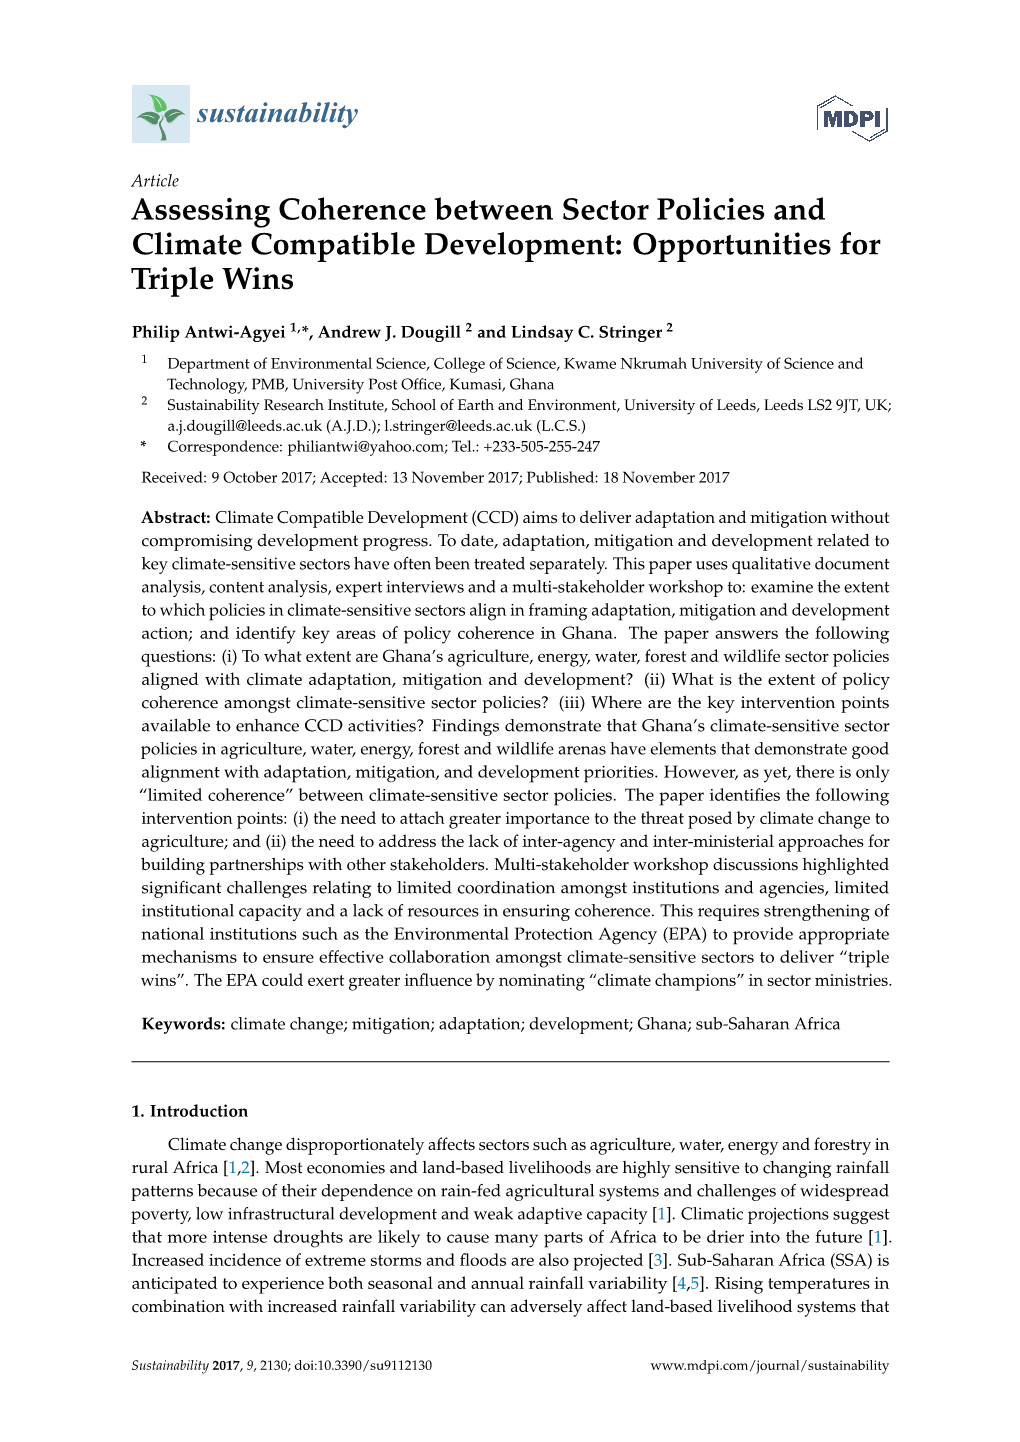 Assessing Coherence Between Sector Policies and Climate Compatible Development: Opportunities for Triple Wins